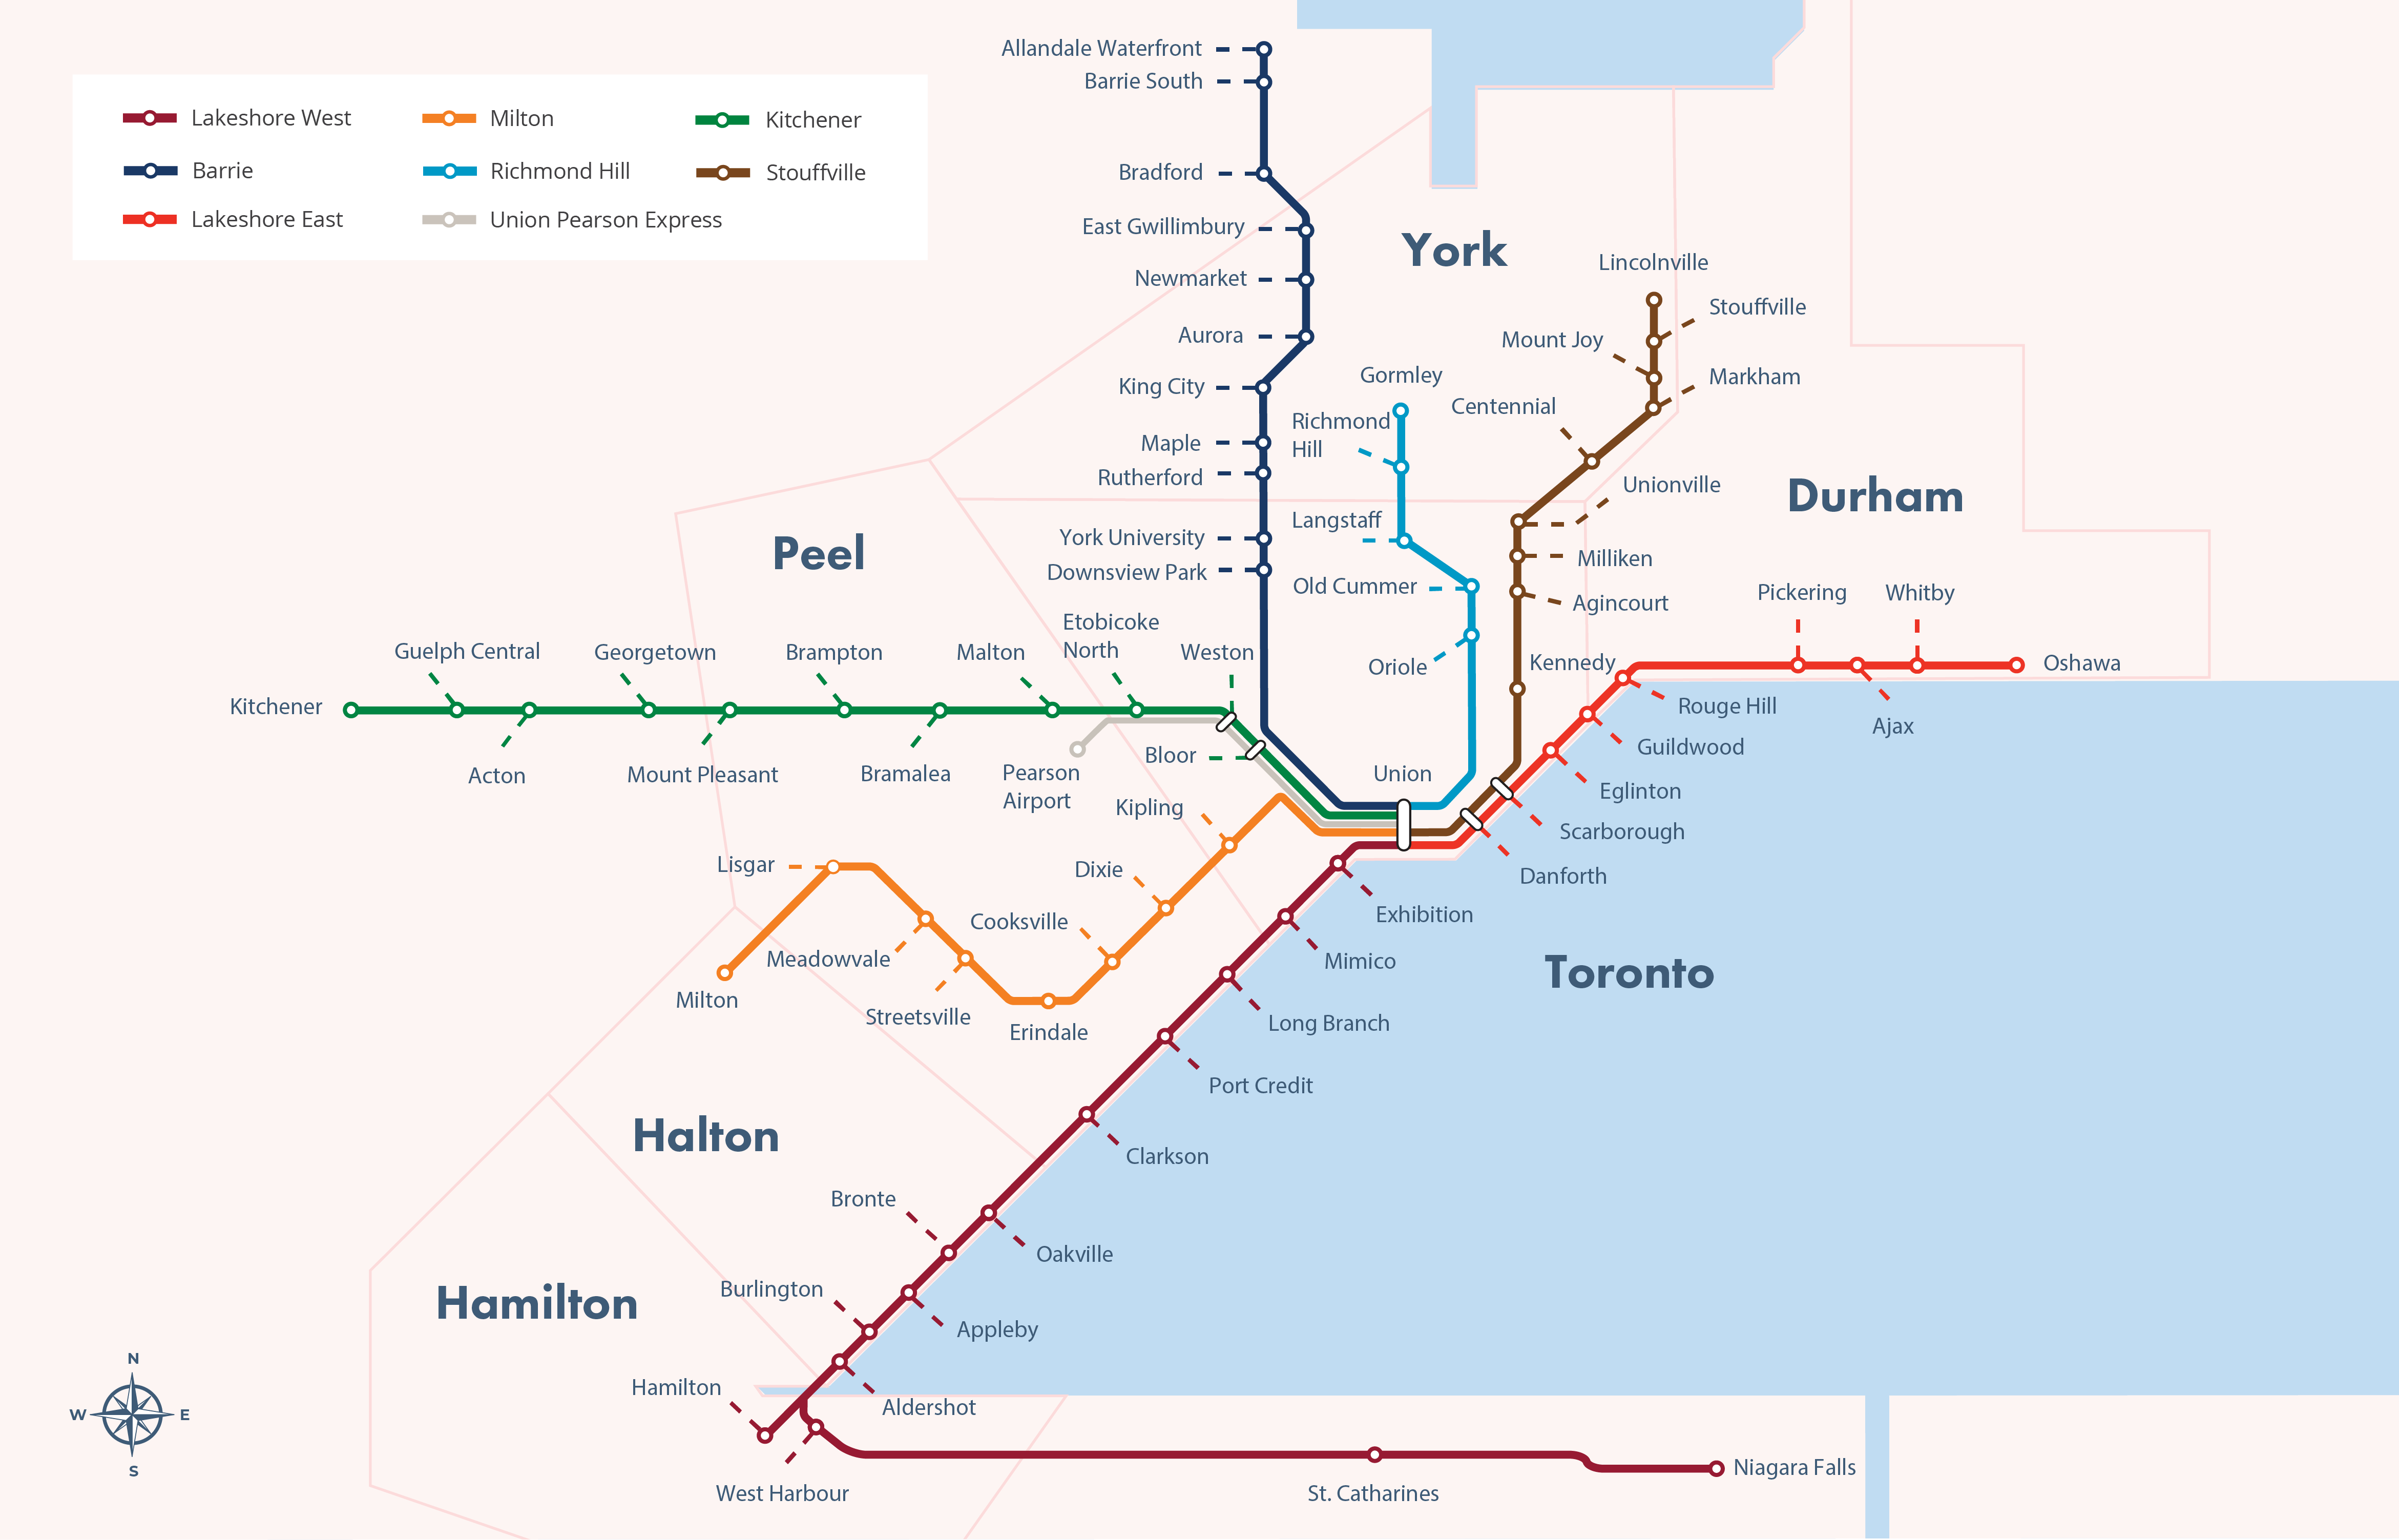 [Updated February 2022] Average Rent Near Transit in the Greater Toronto Area (GTA)